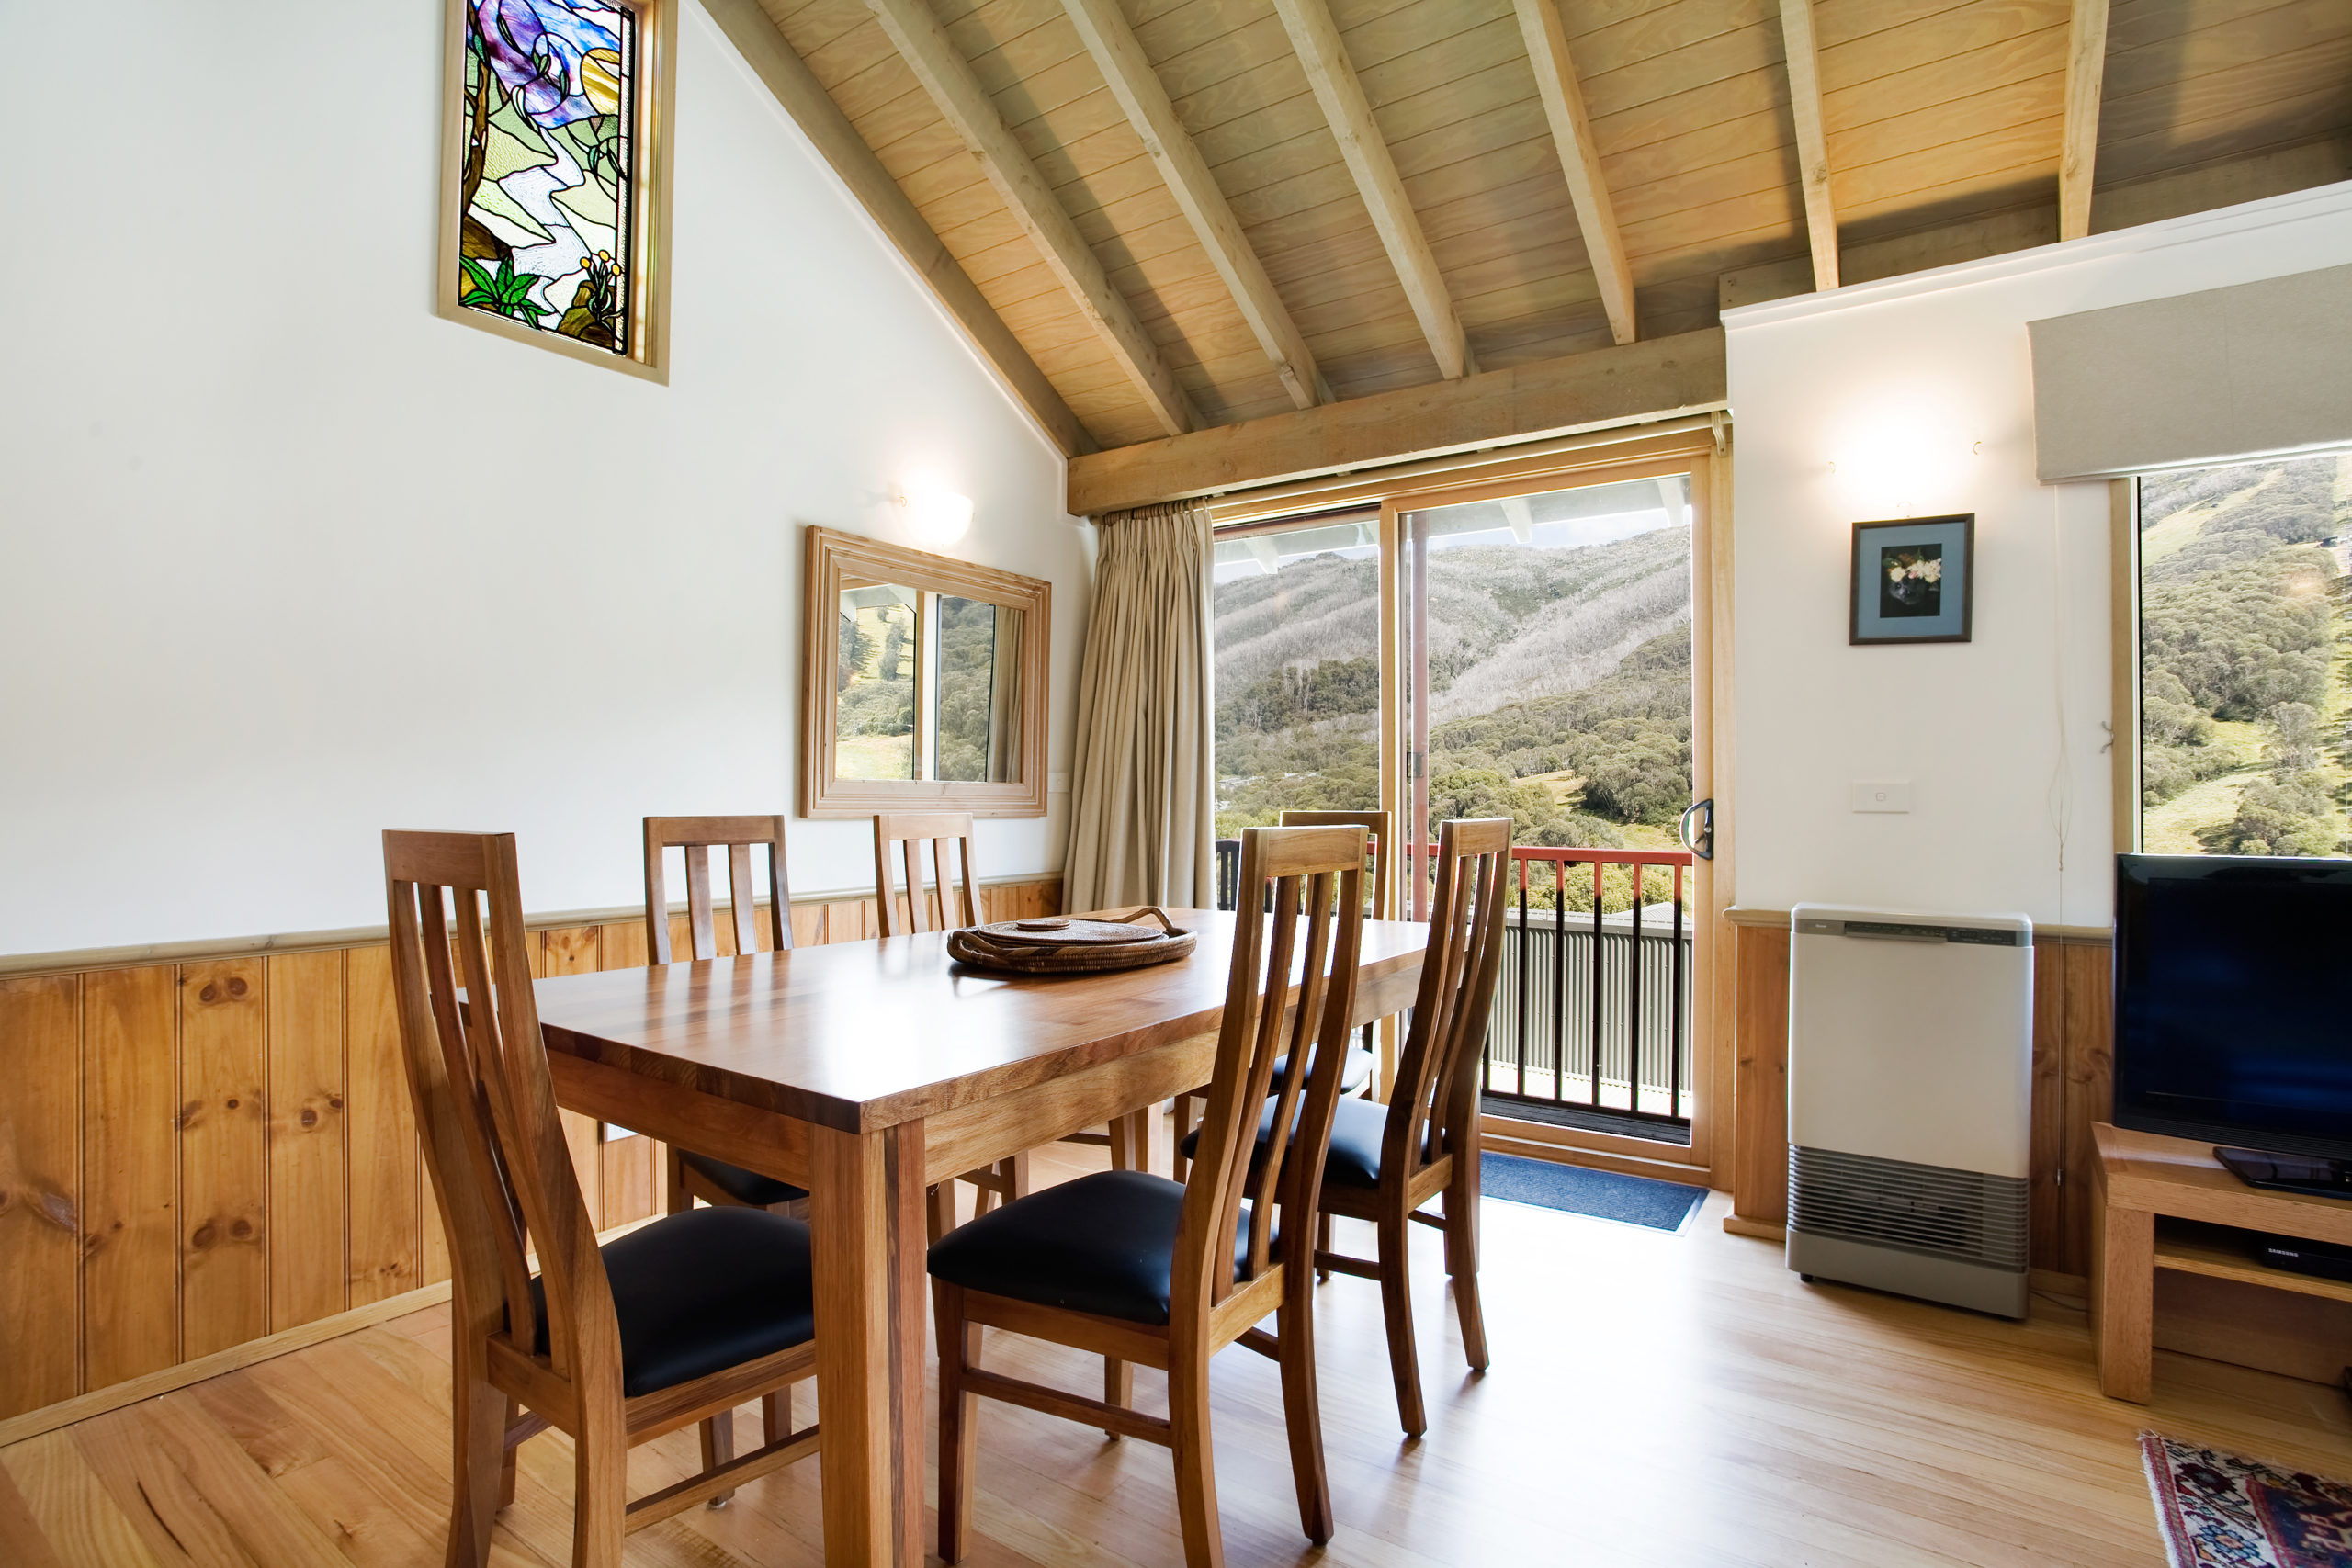 One Bedroom + Loft Townhouse with Private Balcony and Stunning Mountain Views – $810,000